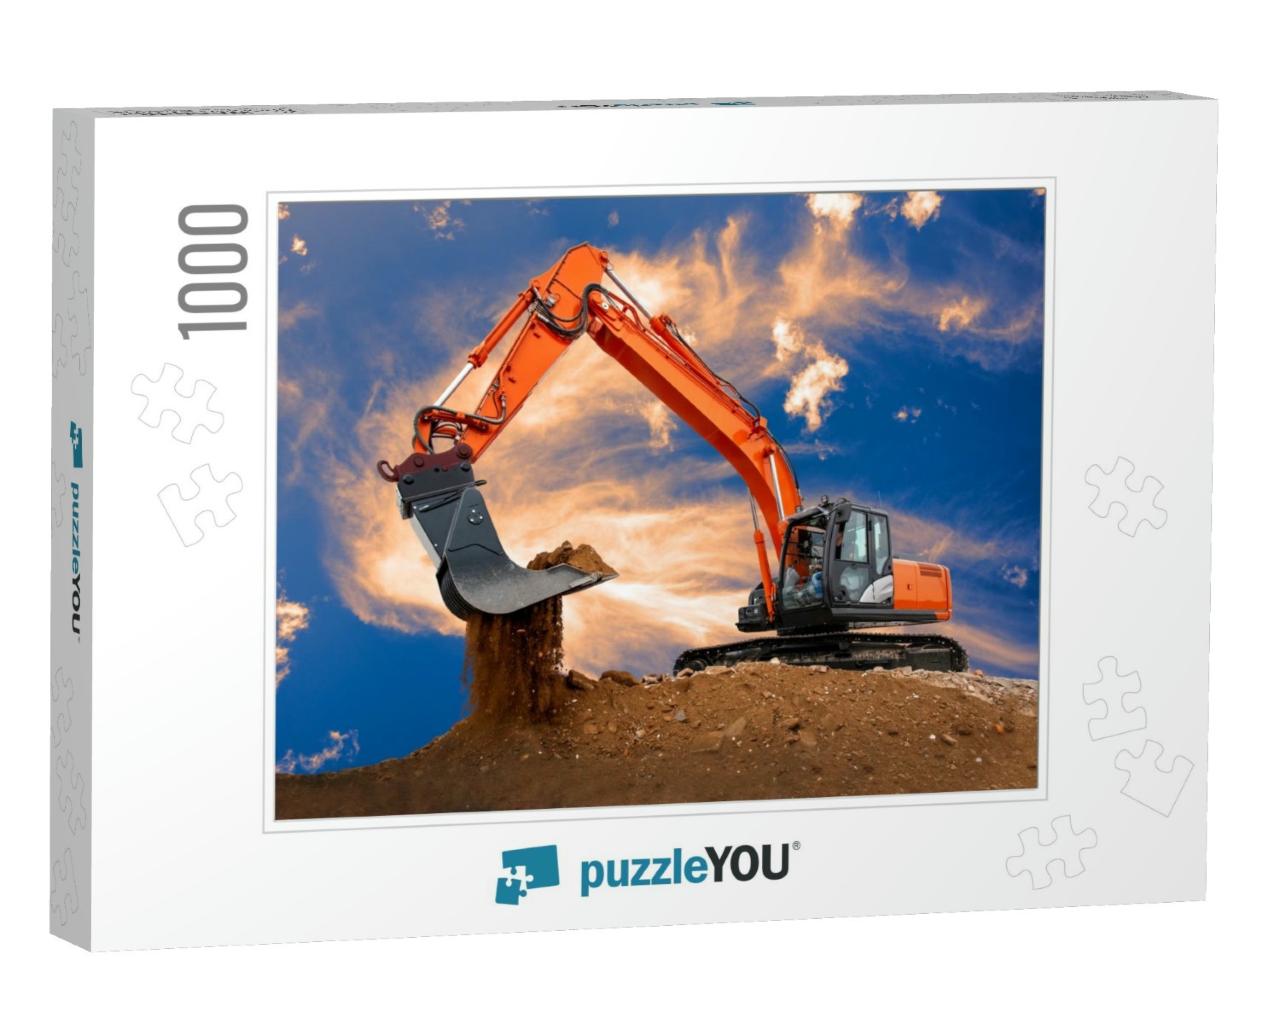 Excavator At Work on Construction Site... Jigsaw Puzzle with 1000 pieces